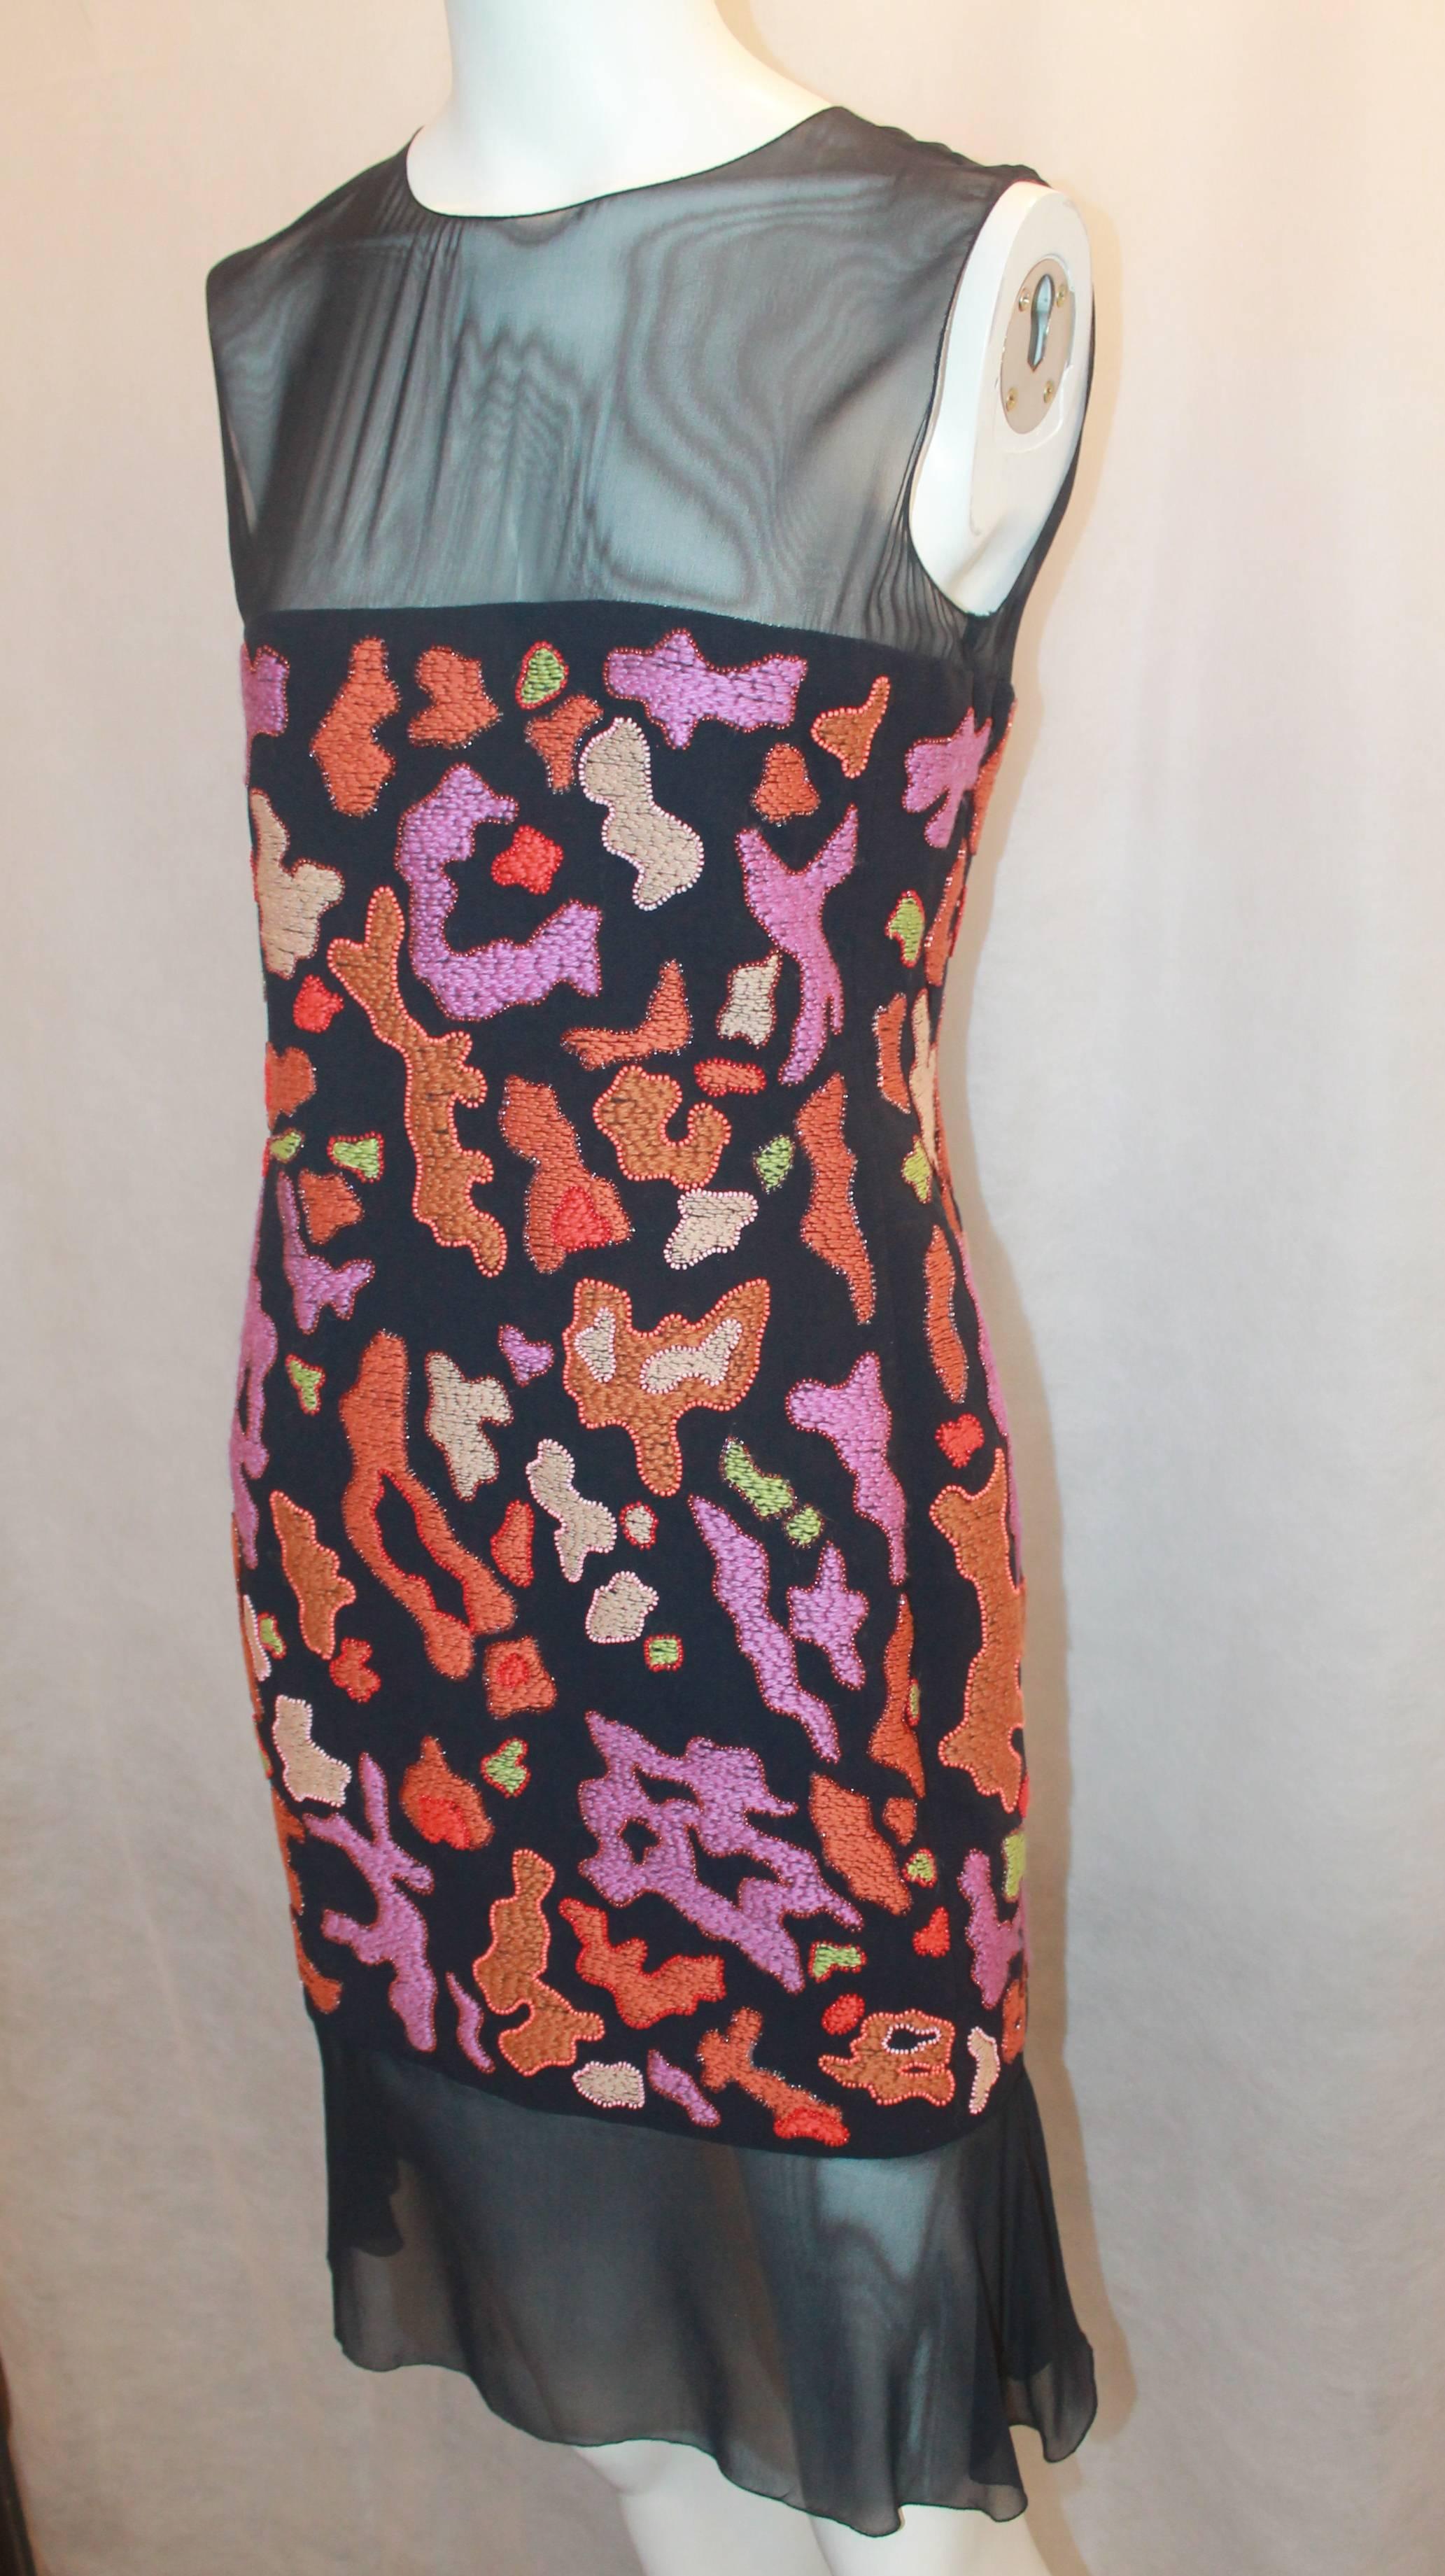 Chanel Navy & Multi-color Embroidered Silk Dress - 40 - 97A. This dress is in excellent condition with a heavy embroidered & beaded section in the middle of the bodice. The top and bottom are a sheer silk chiffon with the bottom having a